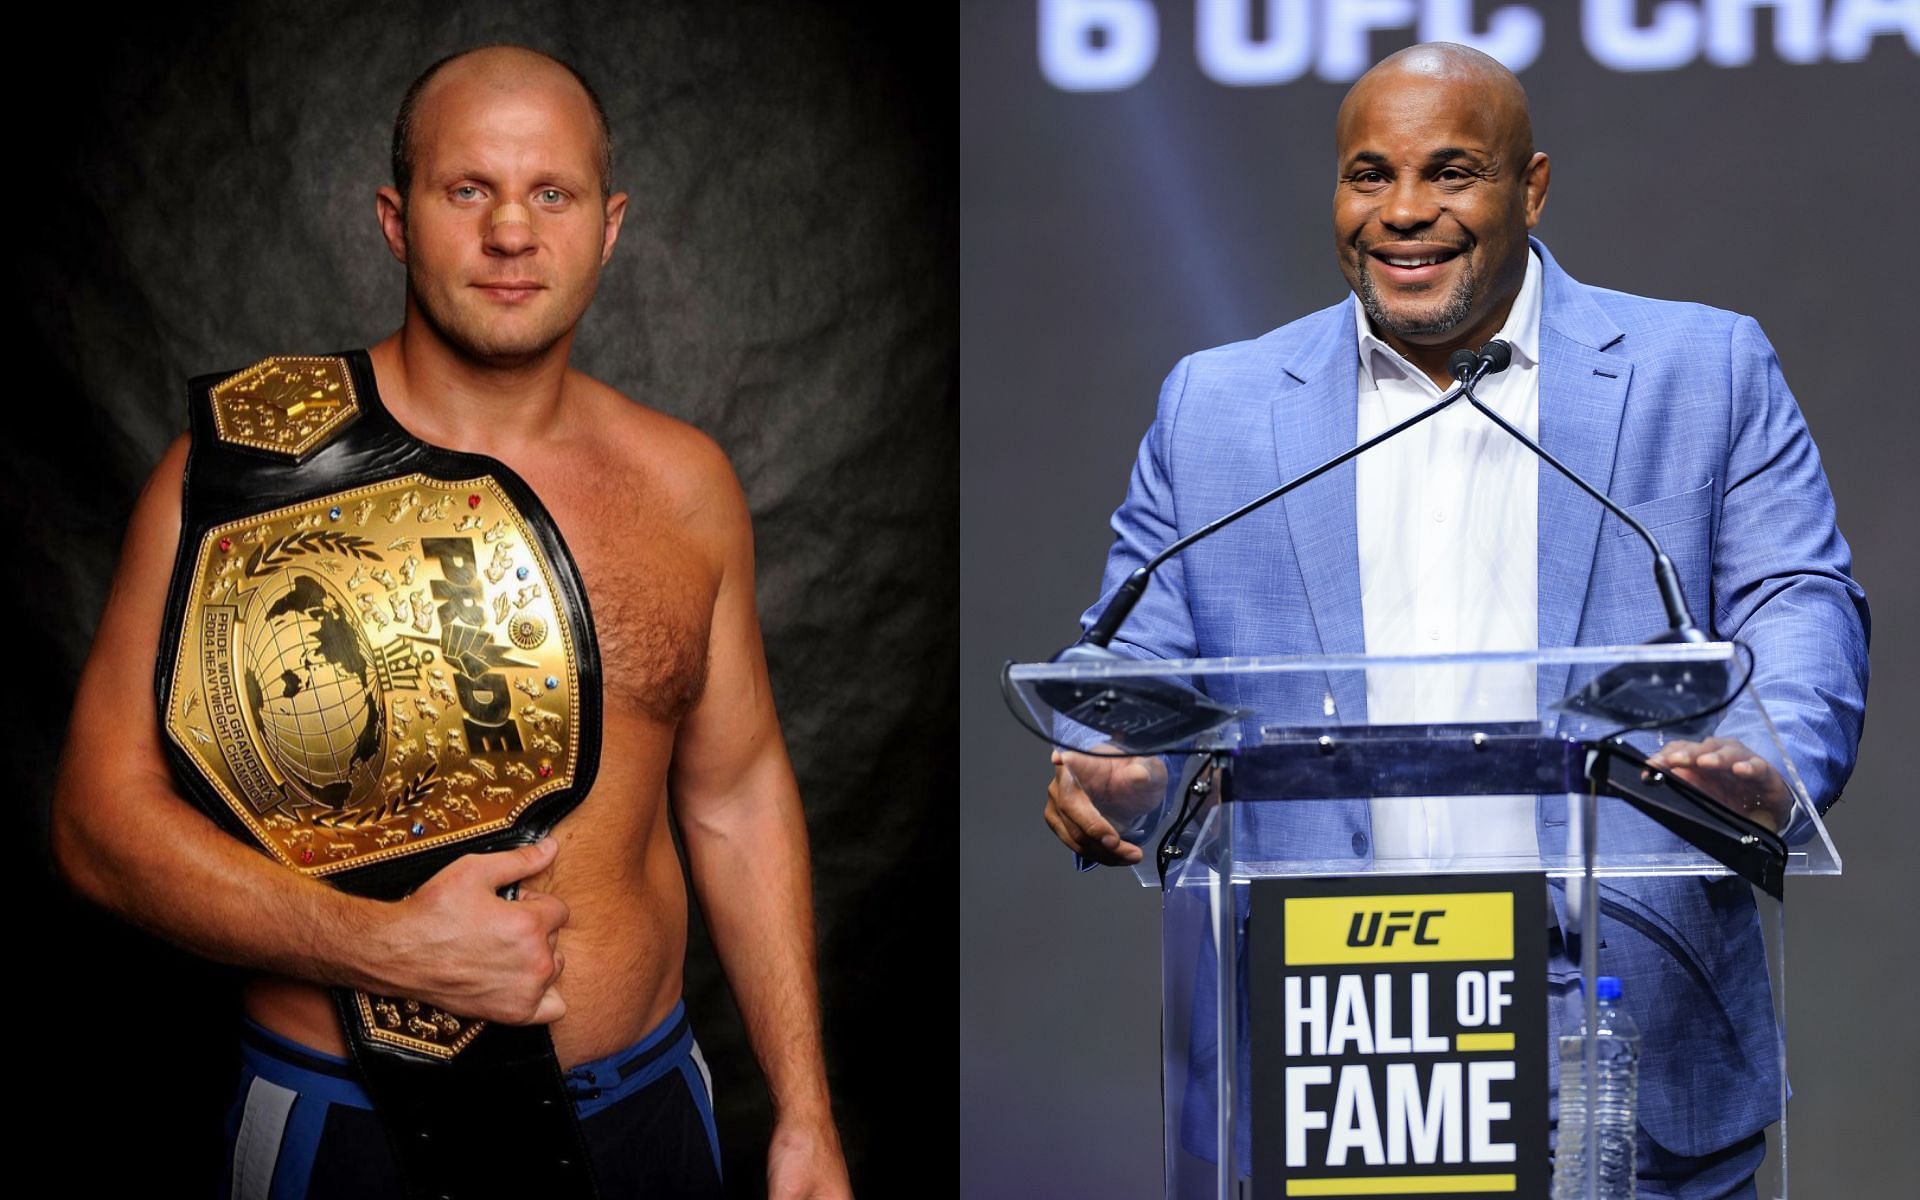 Fedor Emelianenko (left) and Daniel Cormier (right) [Image Courtesy: Getty Images and @spanish_mma on Instagram]